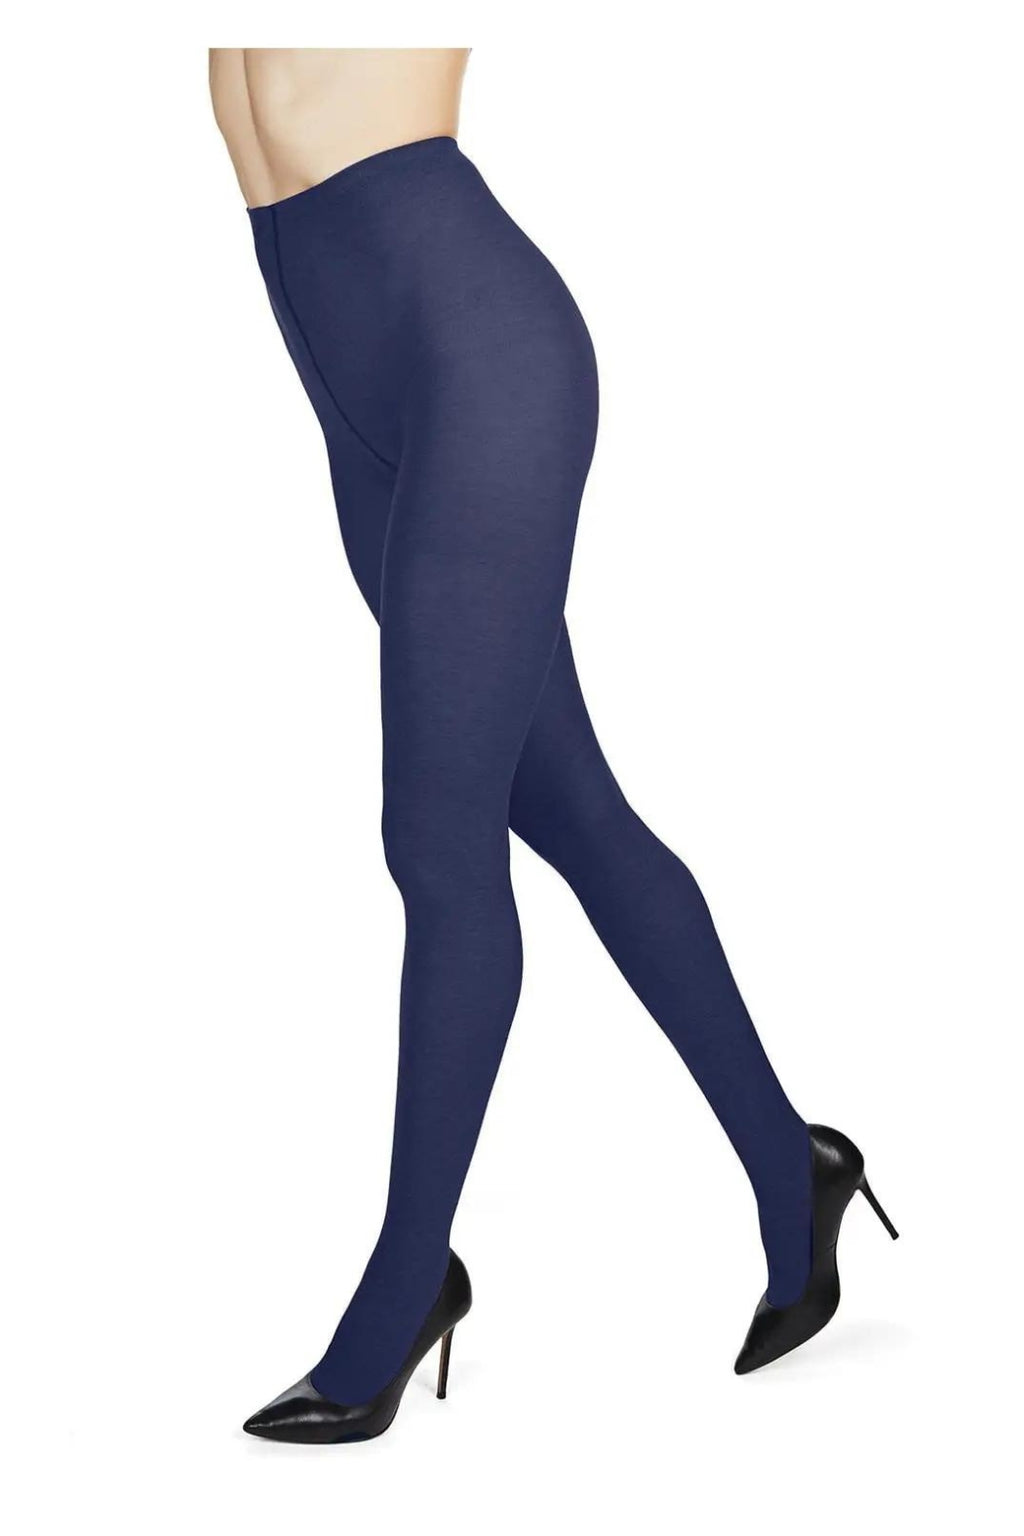 MeMoi Perfectly Opaque Control Top Tights – Queen of Hearts and